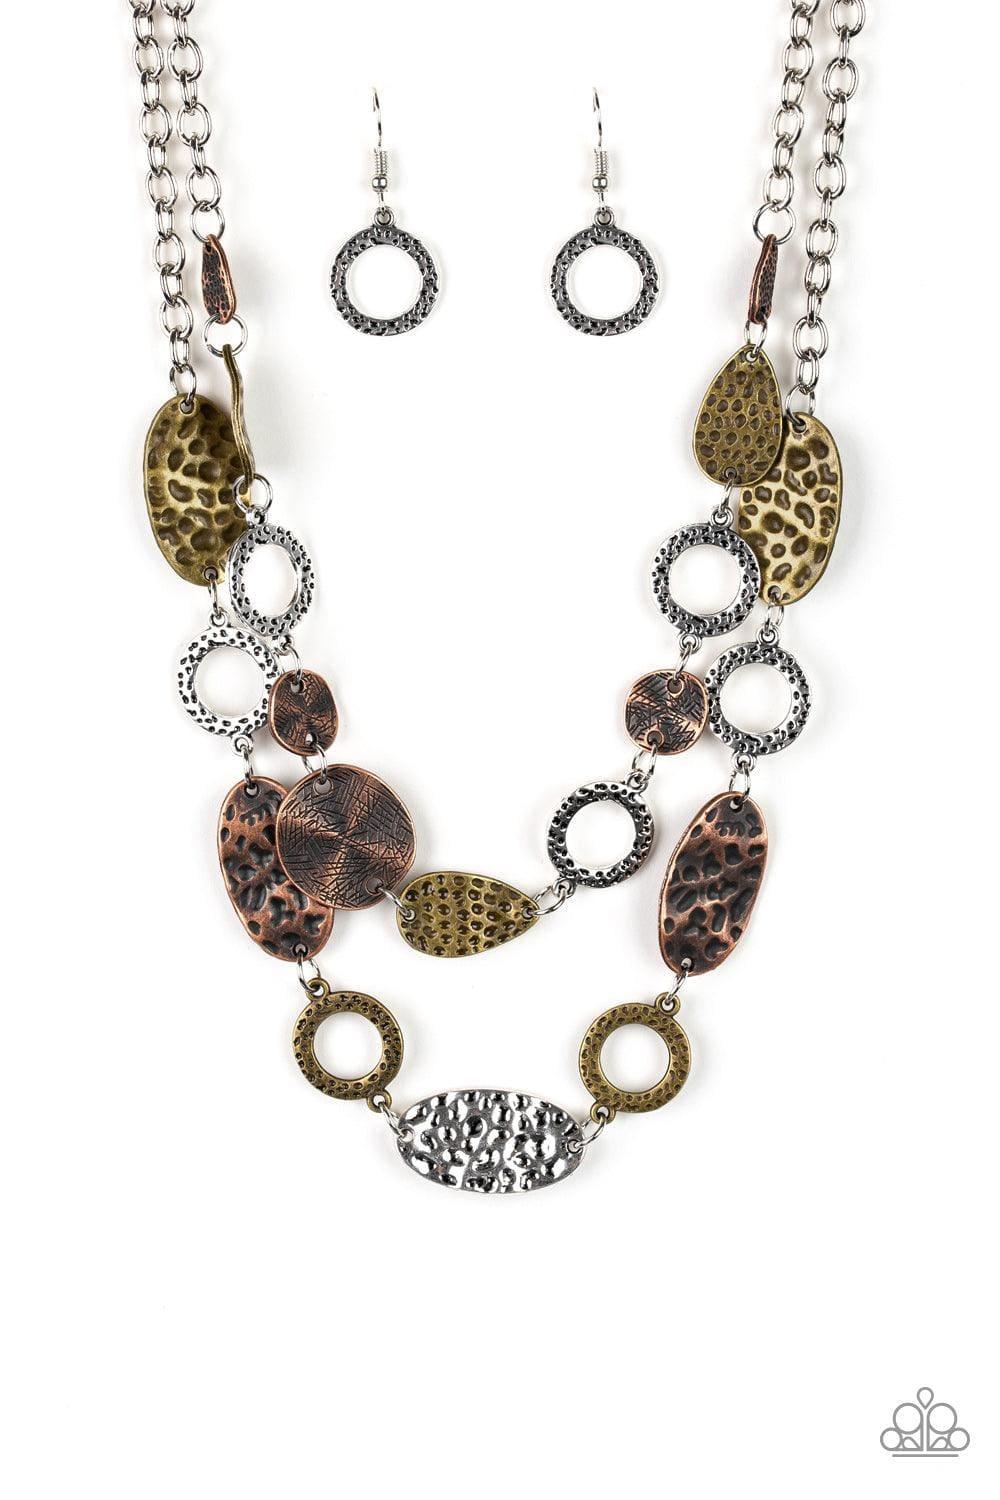 Paparazzi Accessories - Trippin On Texture - Multicolor Necklace - Bling by JessieK